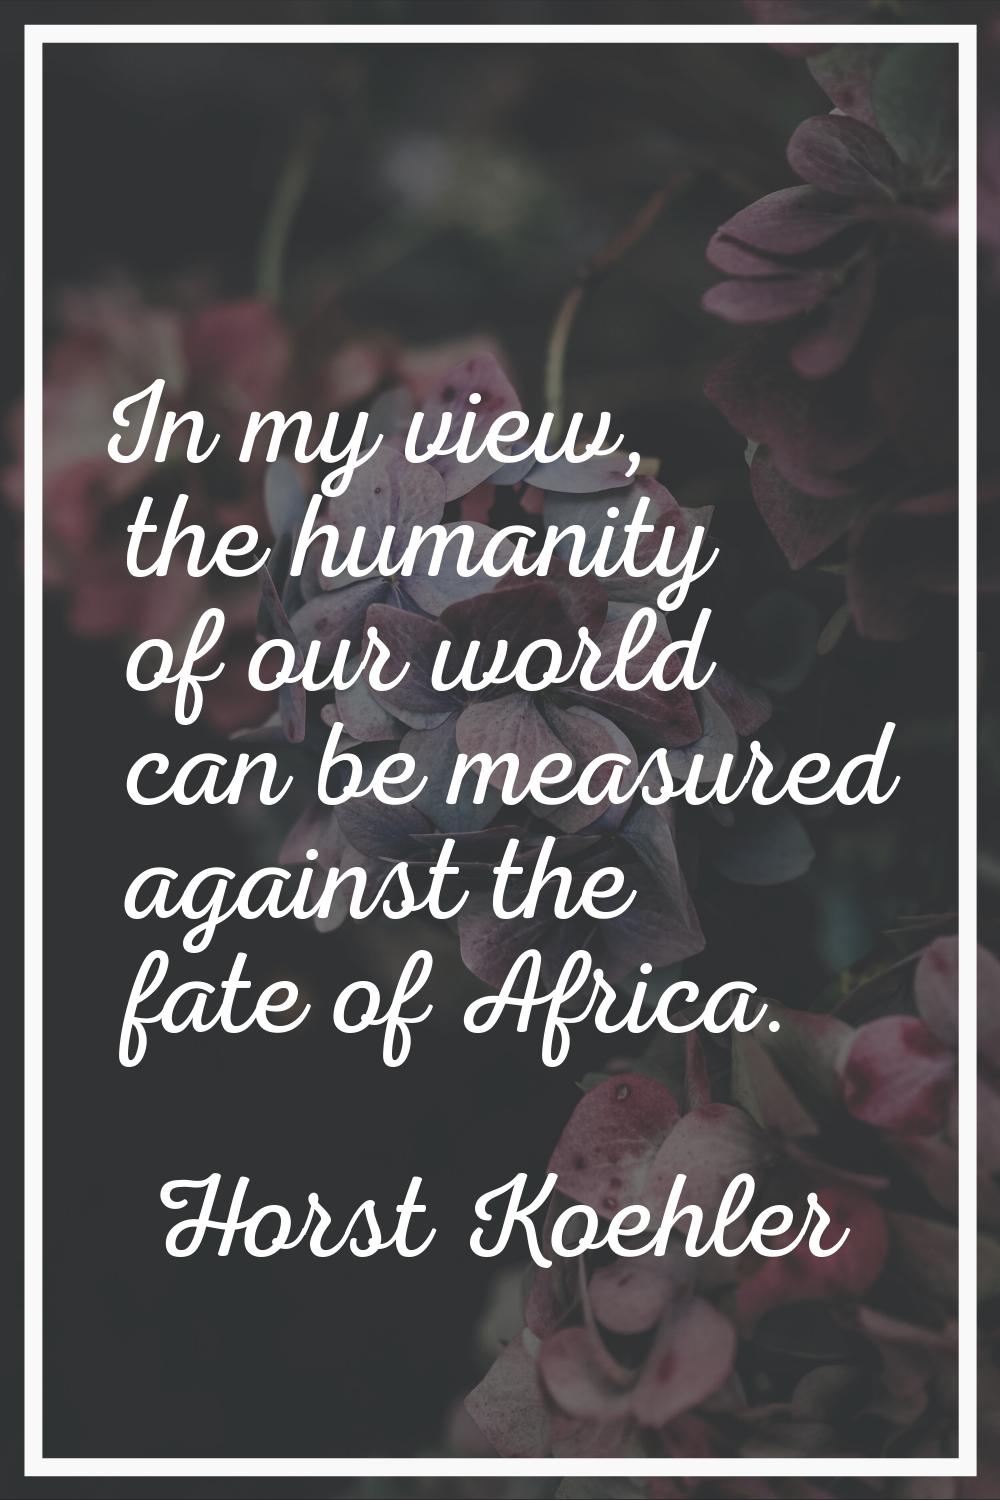 In my view, the humanity of our world can be measured against the fate of Africa.